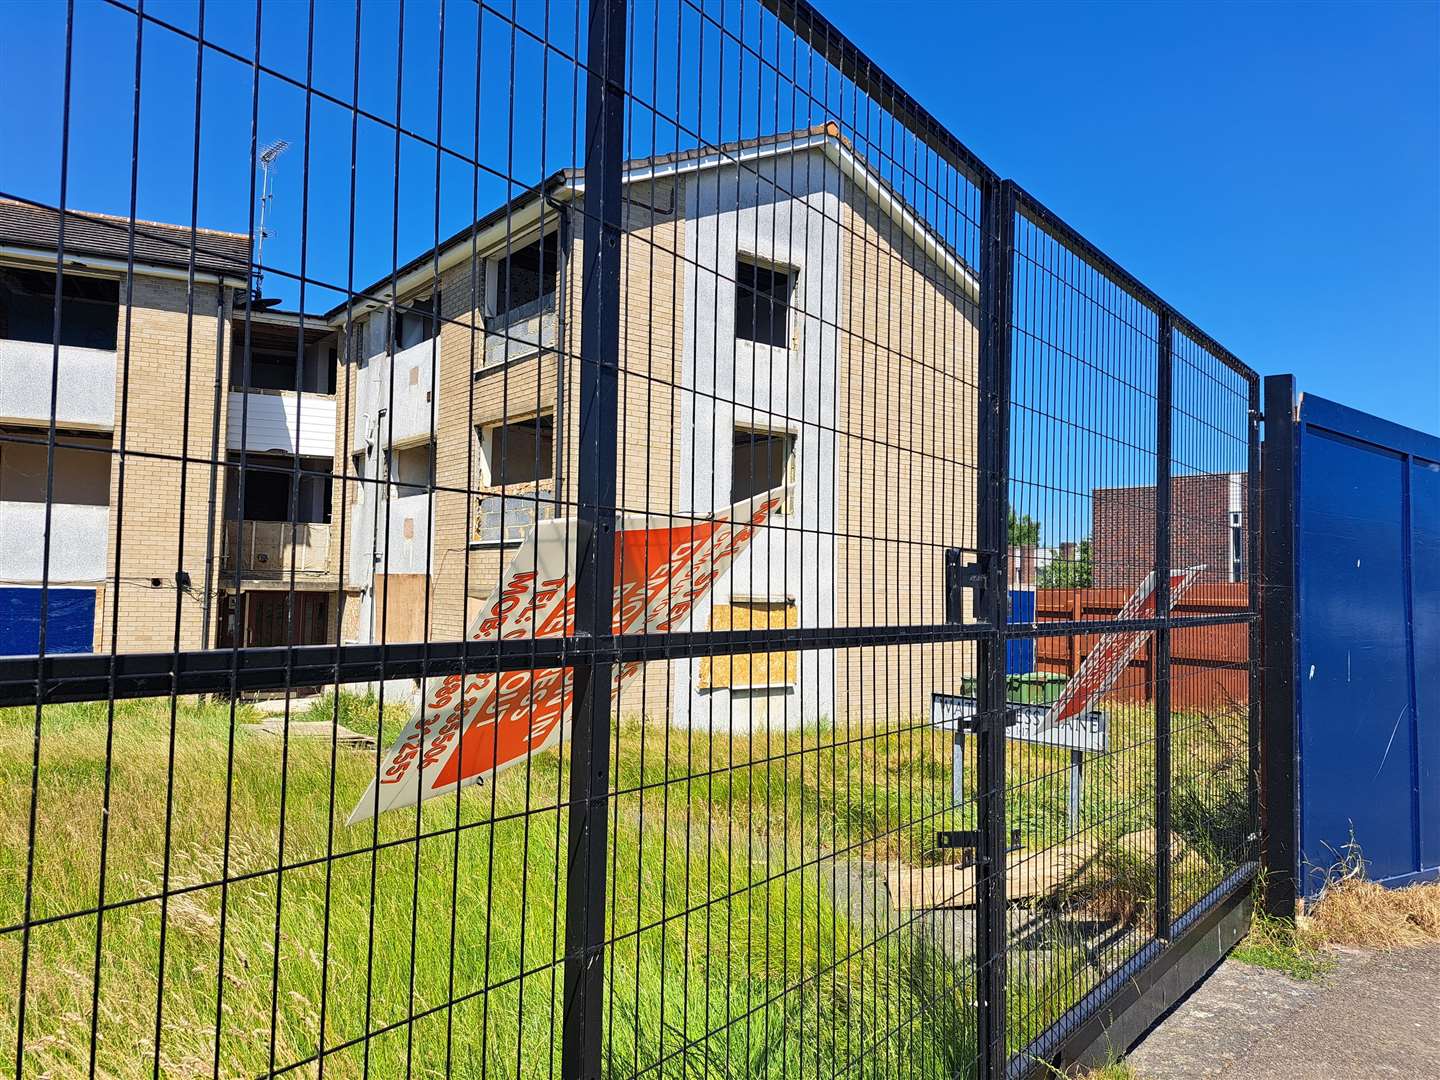 There are no windows to the old flats which has also been fenced off